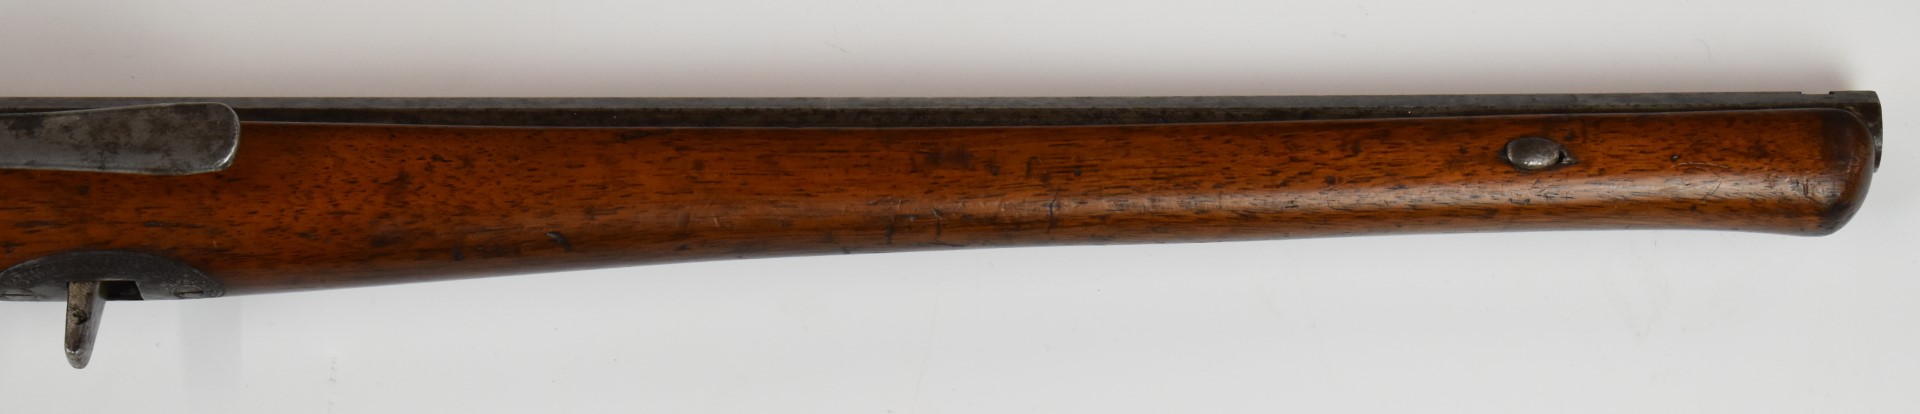 G Richter of Breslau side-lever cocking 8mm air rifle with named top plate, scrolling engraving to - Image 5 of 17